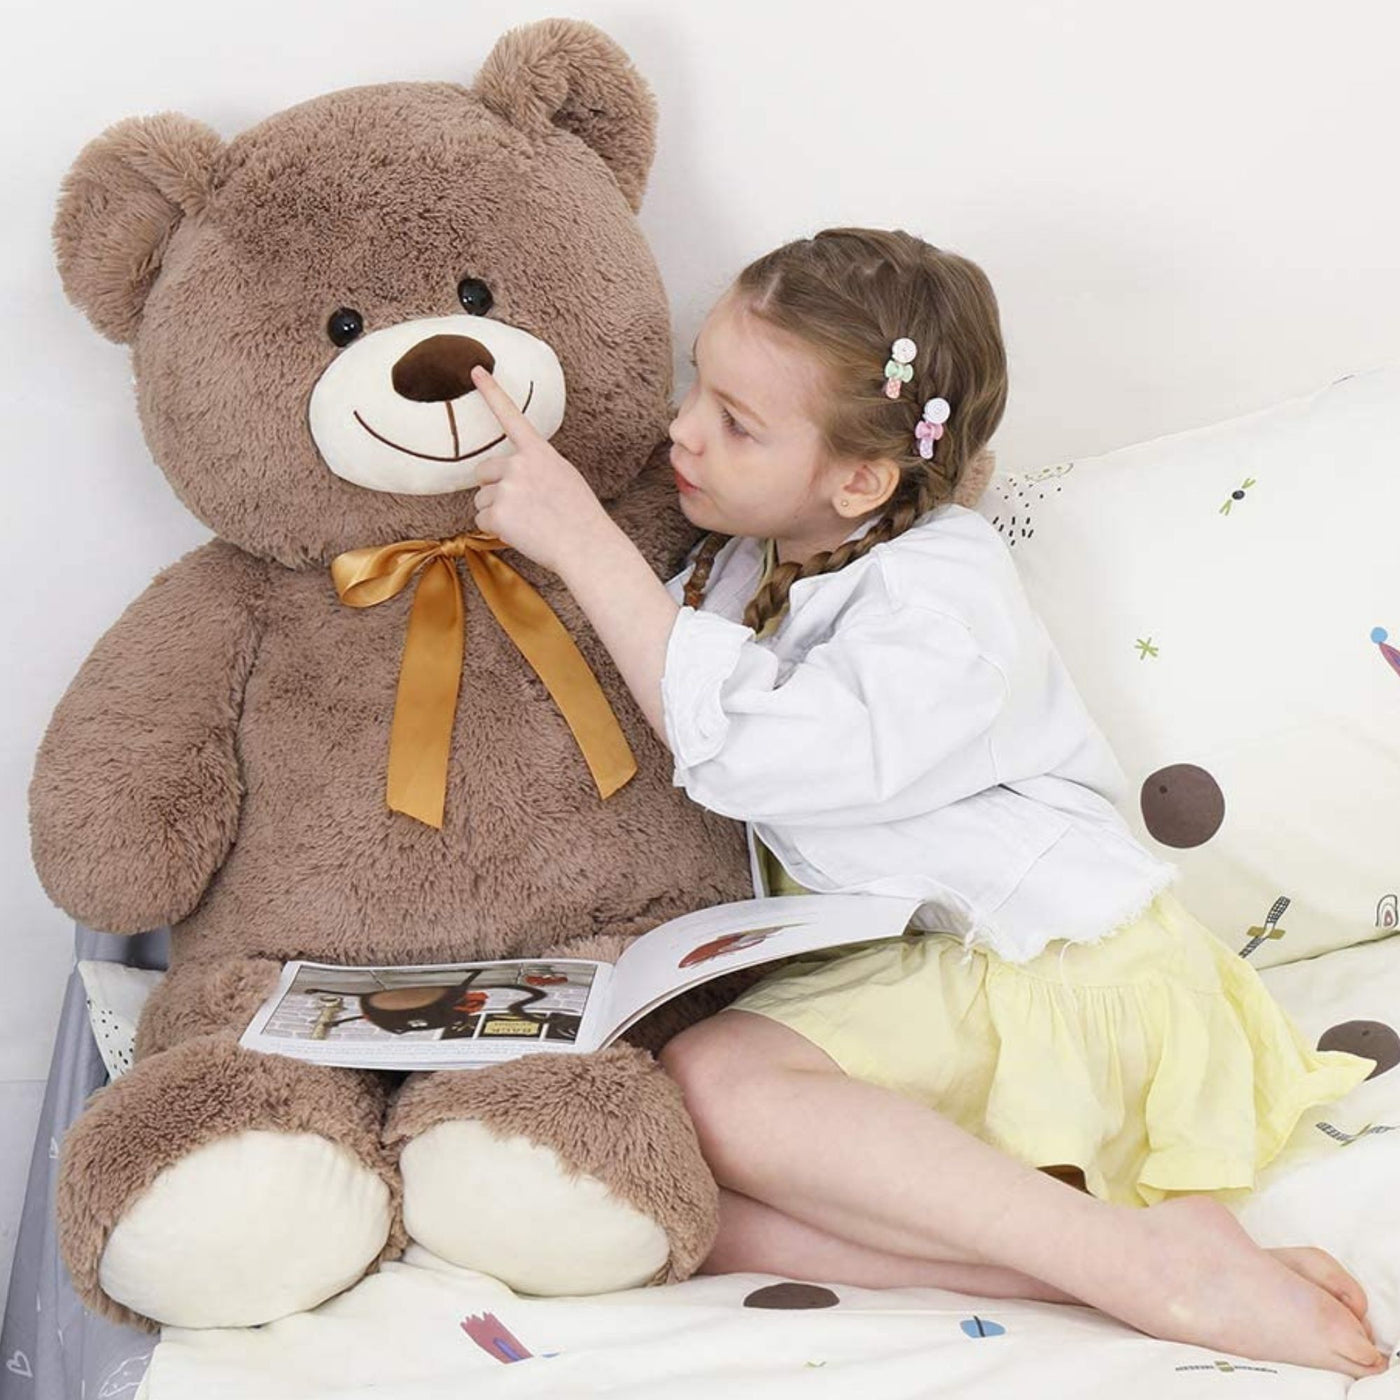 Giant Teddy Bear Stuffed Animal Toy, Brown, 40 Inches